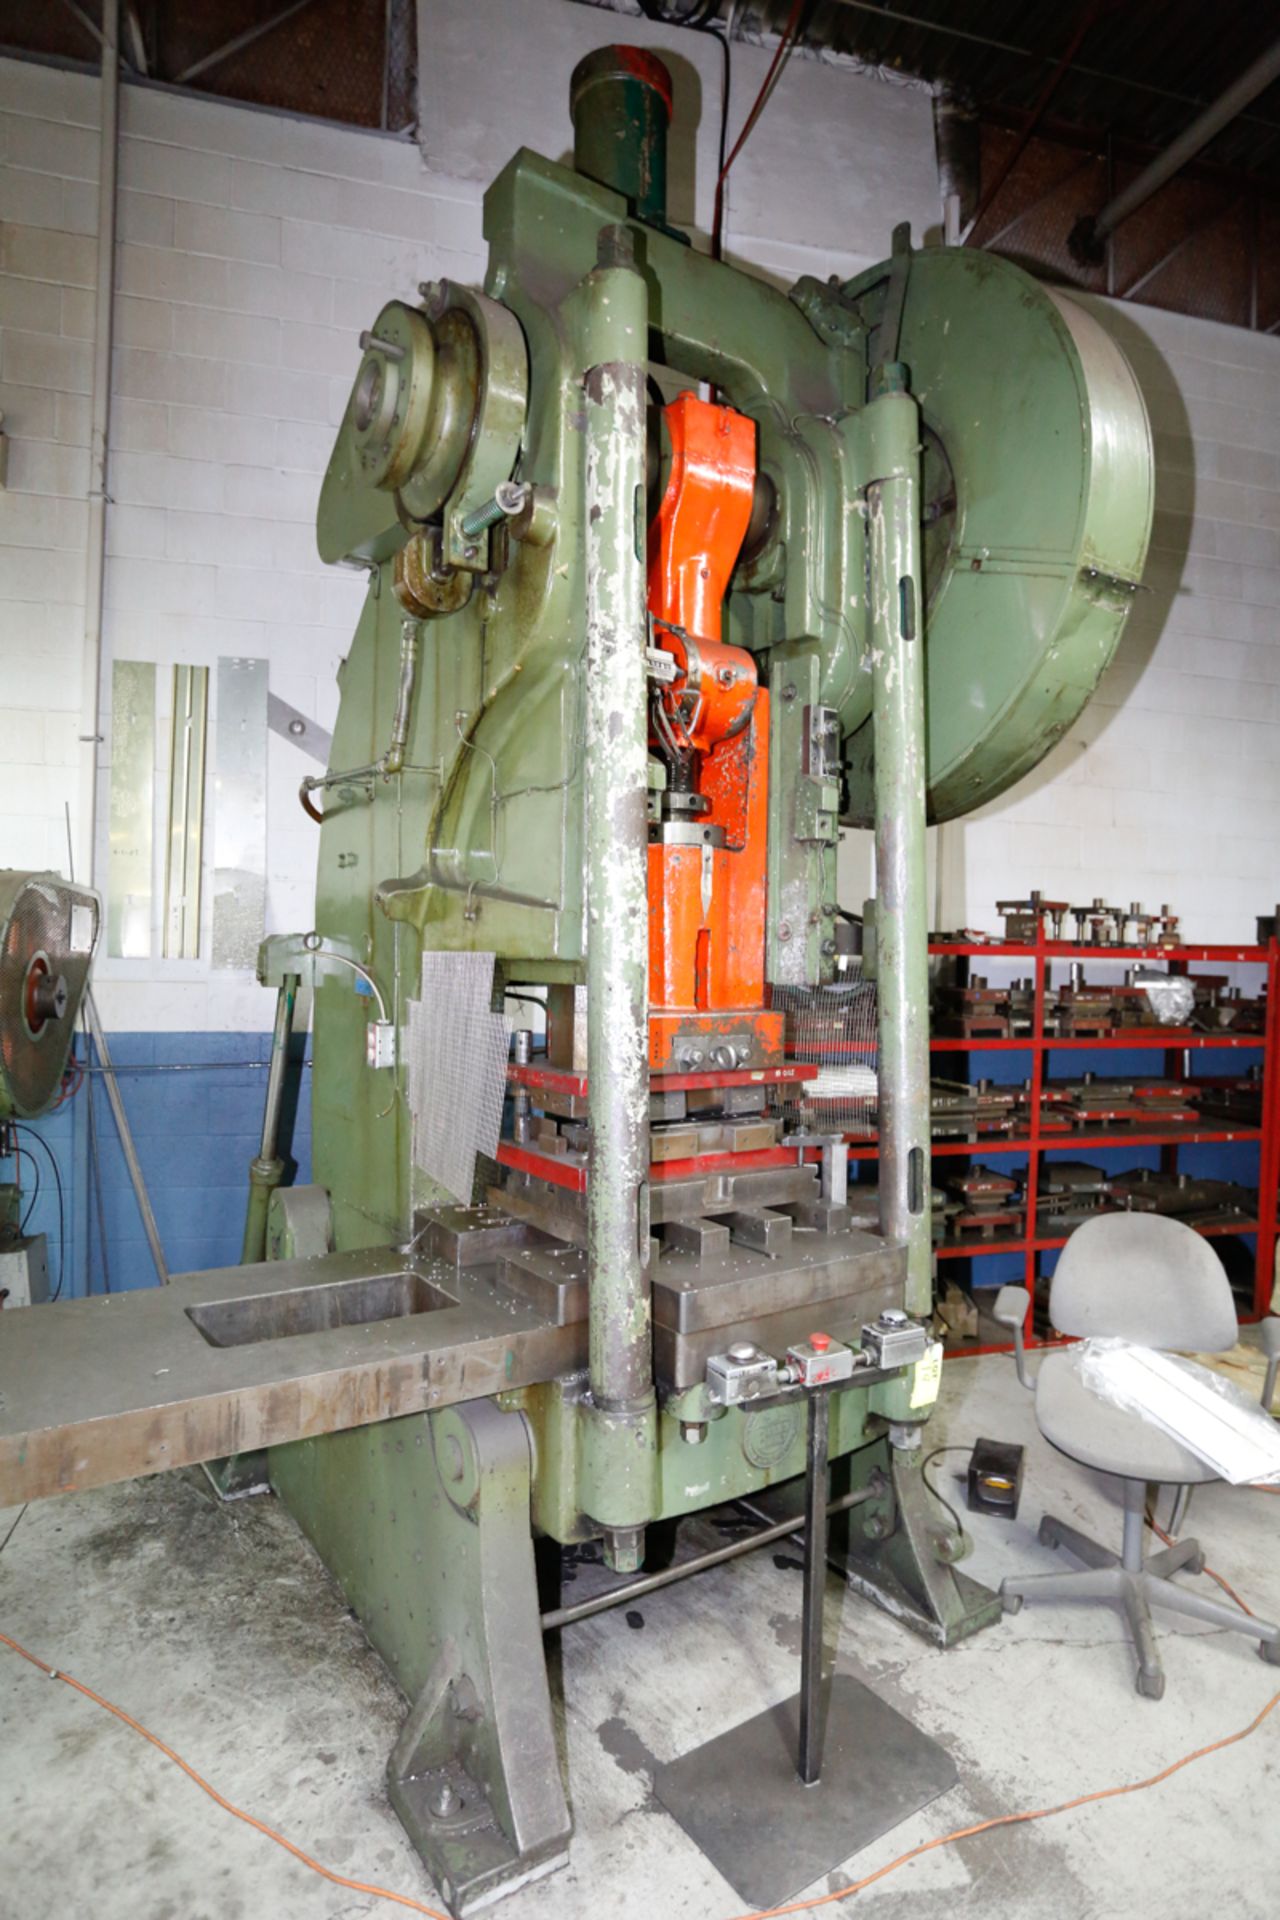 BLISS # 28-1/2 125 TON PUNCH PRESS, 2" STROKE, 23" SHUT HEIGHT, 85 SPM, 24 X 26 BED, AIR ACTUATED